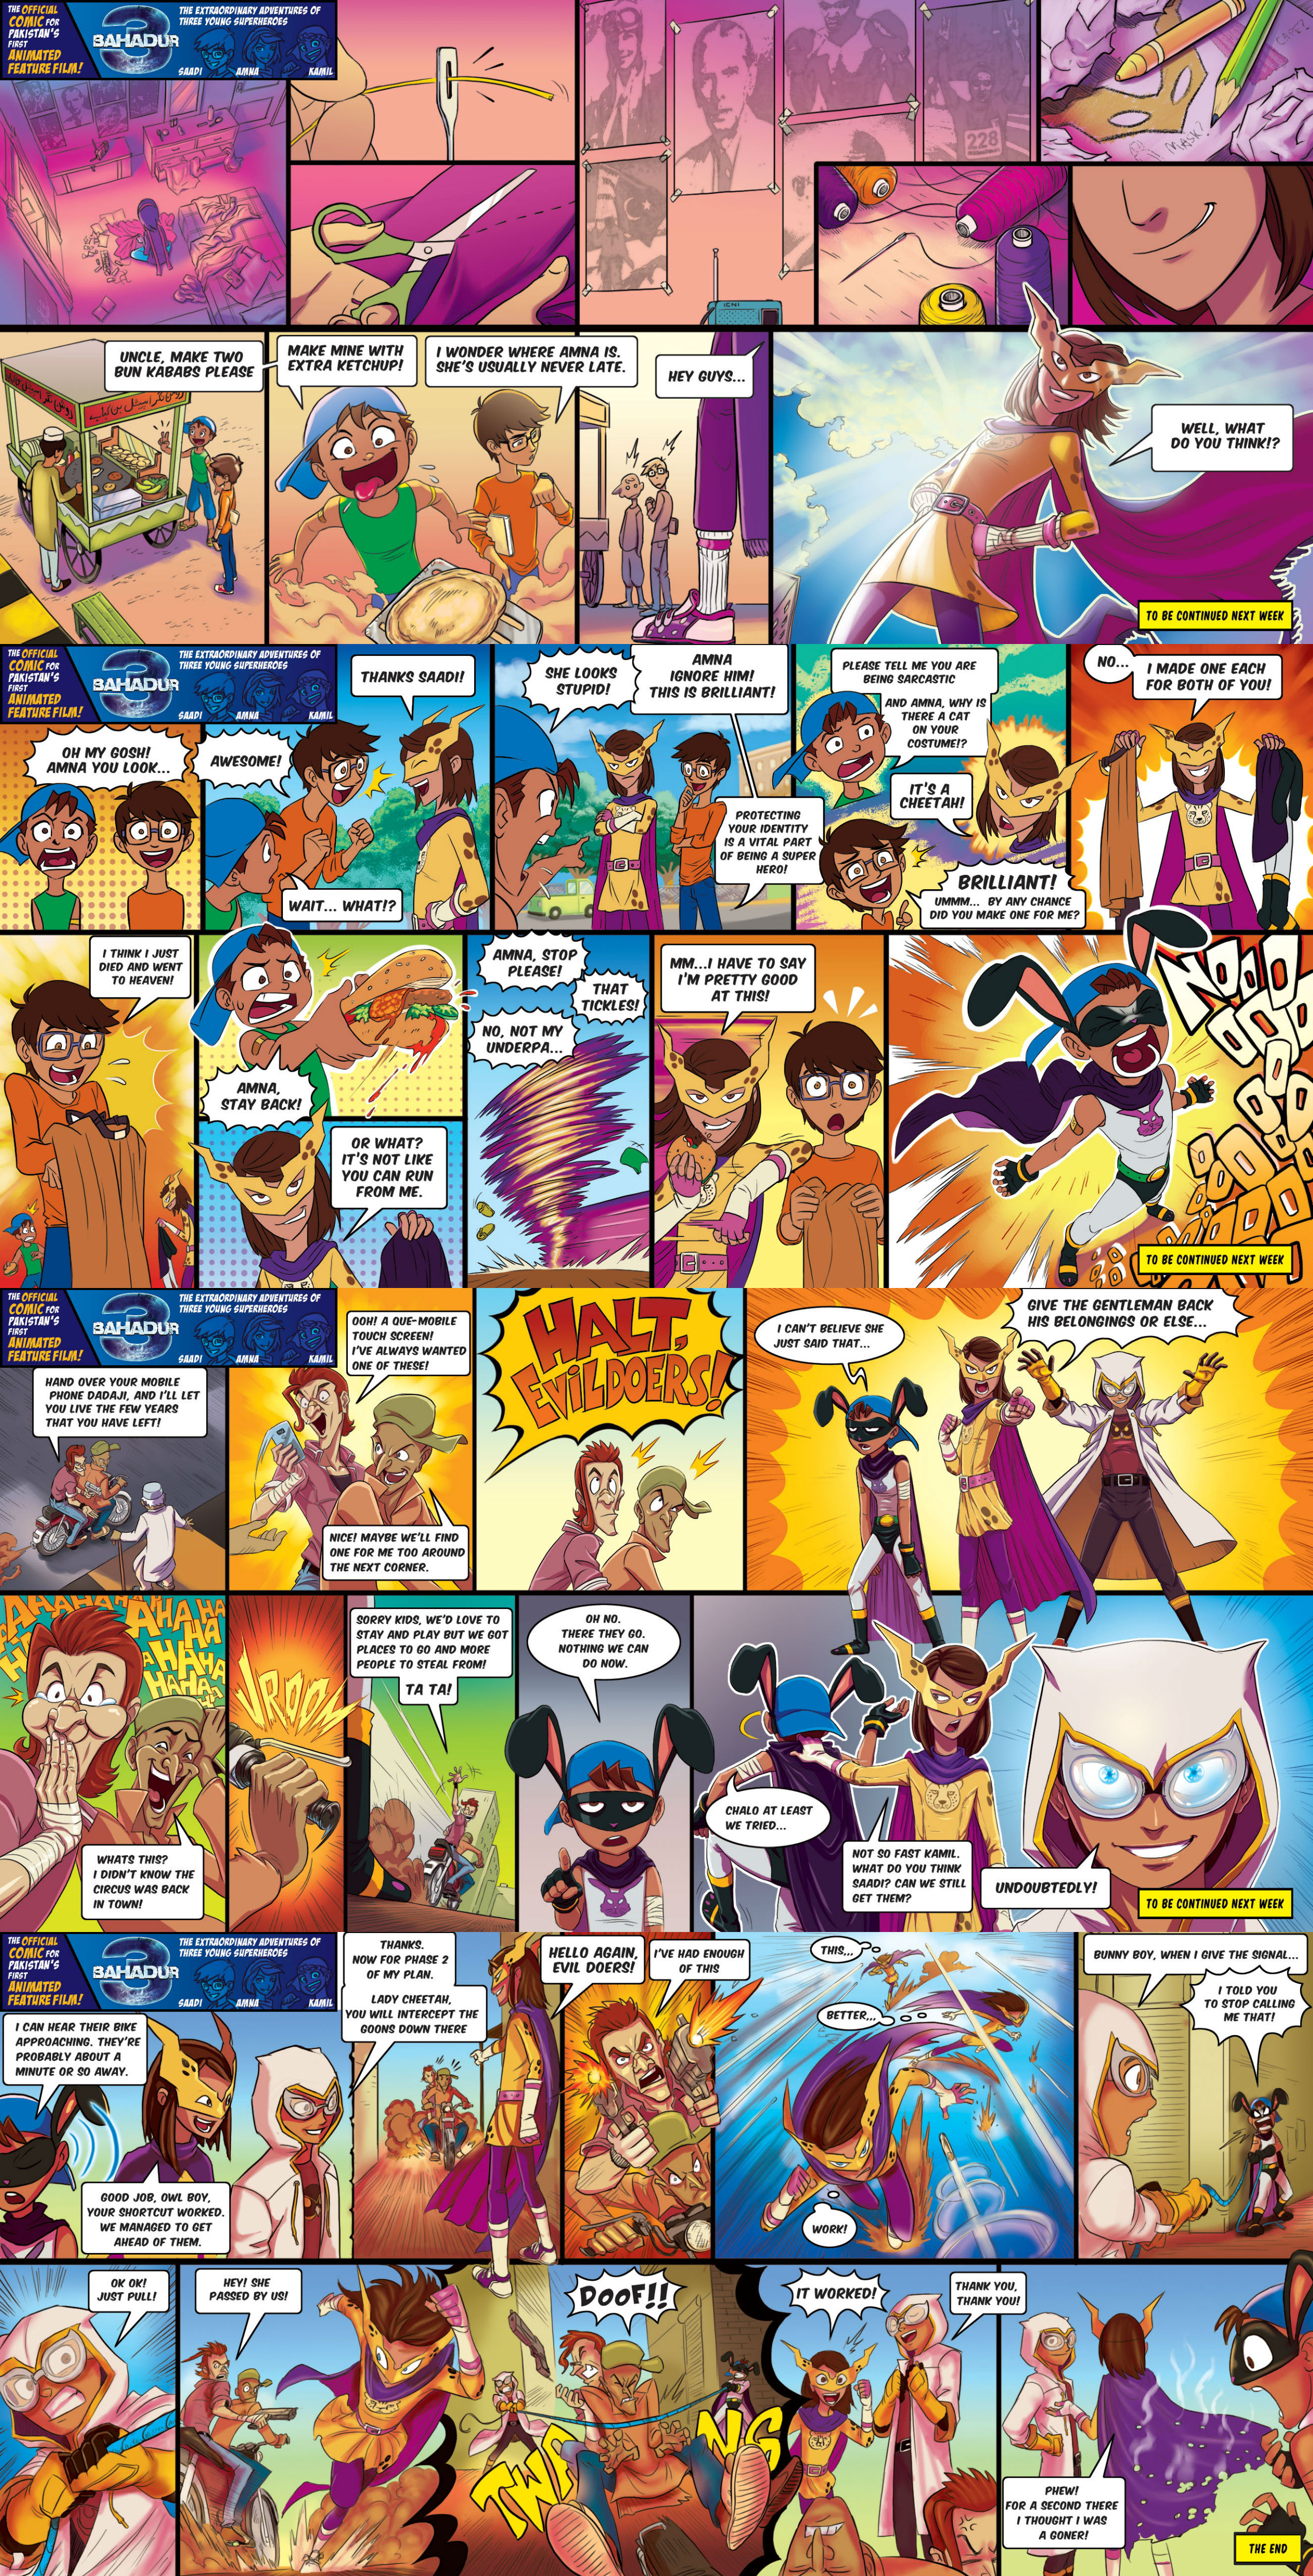 Waadi Animations launches the official #3Bahadur Website, Comic Strip  Series and Music Video featuring Shiraz Uppal - Vmag